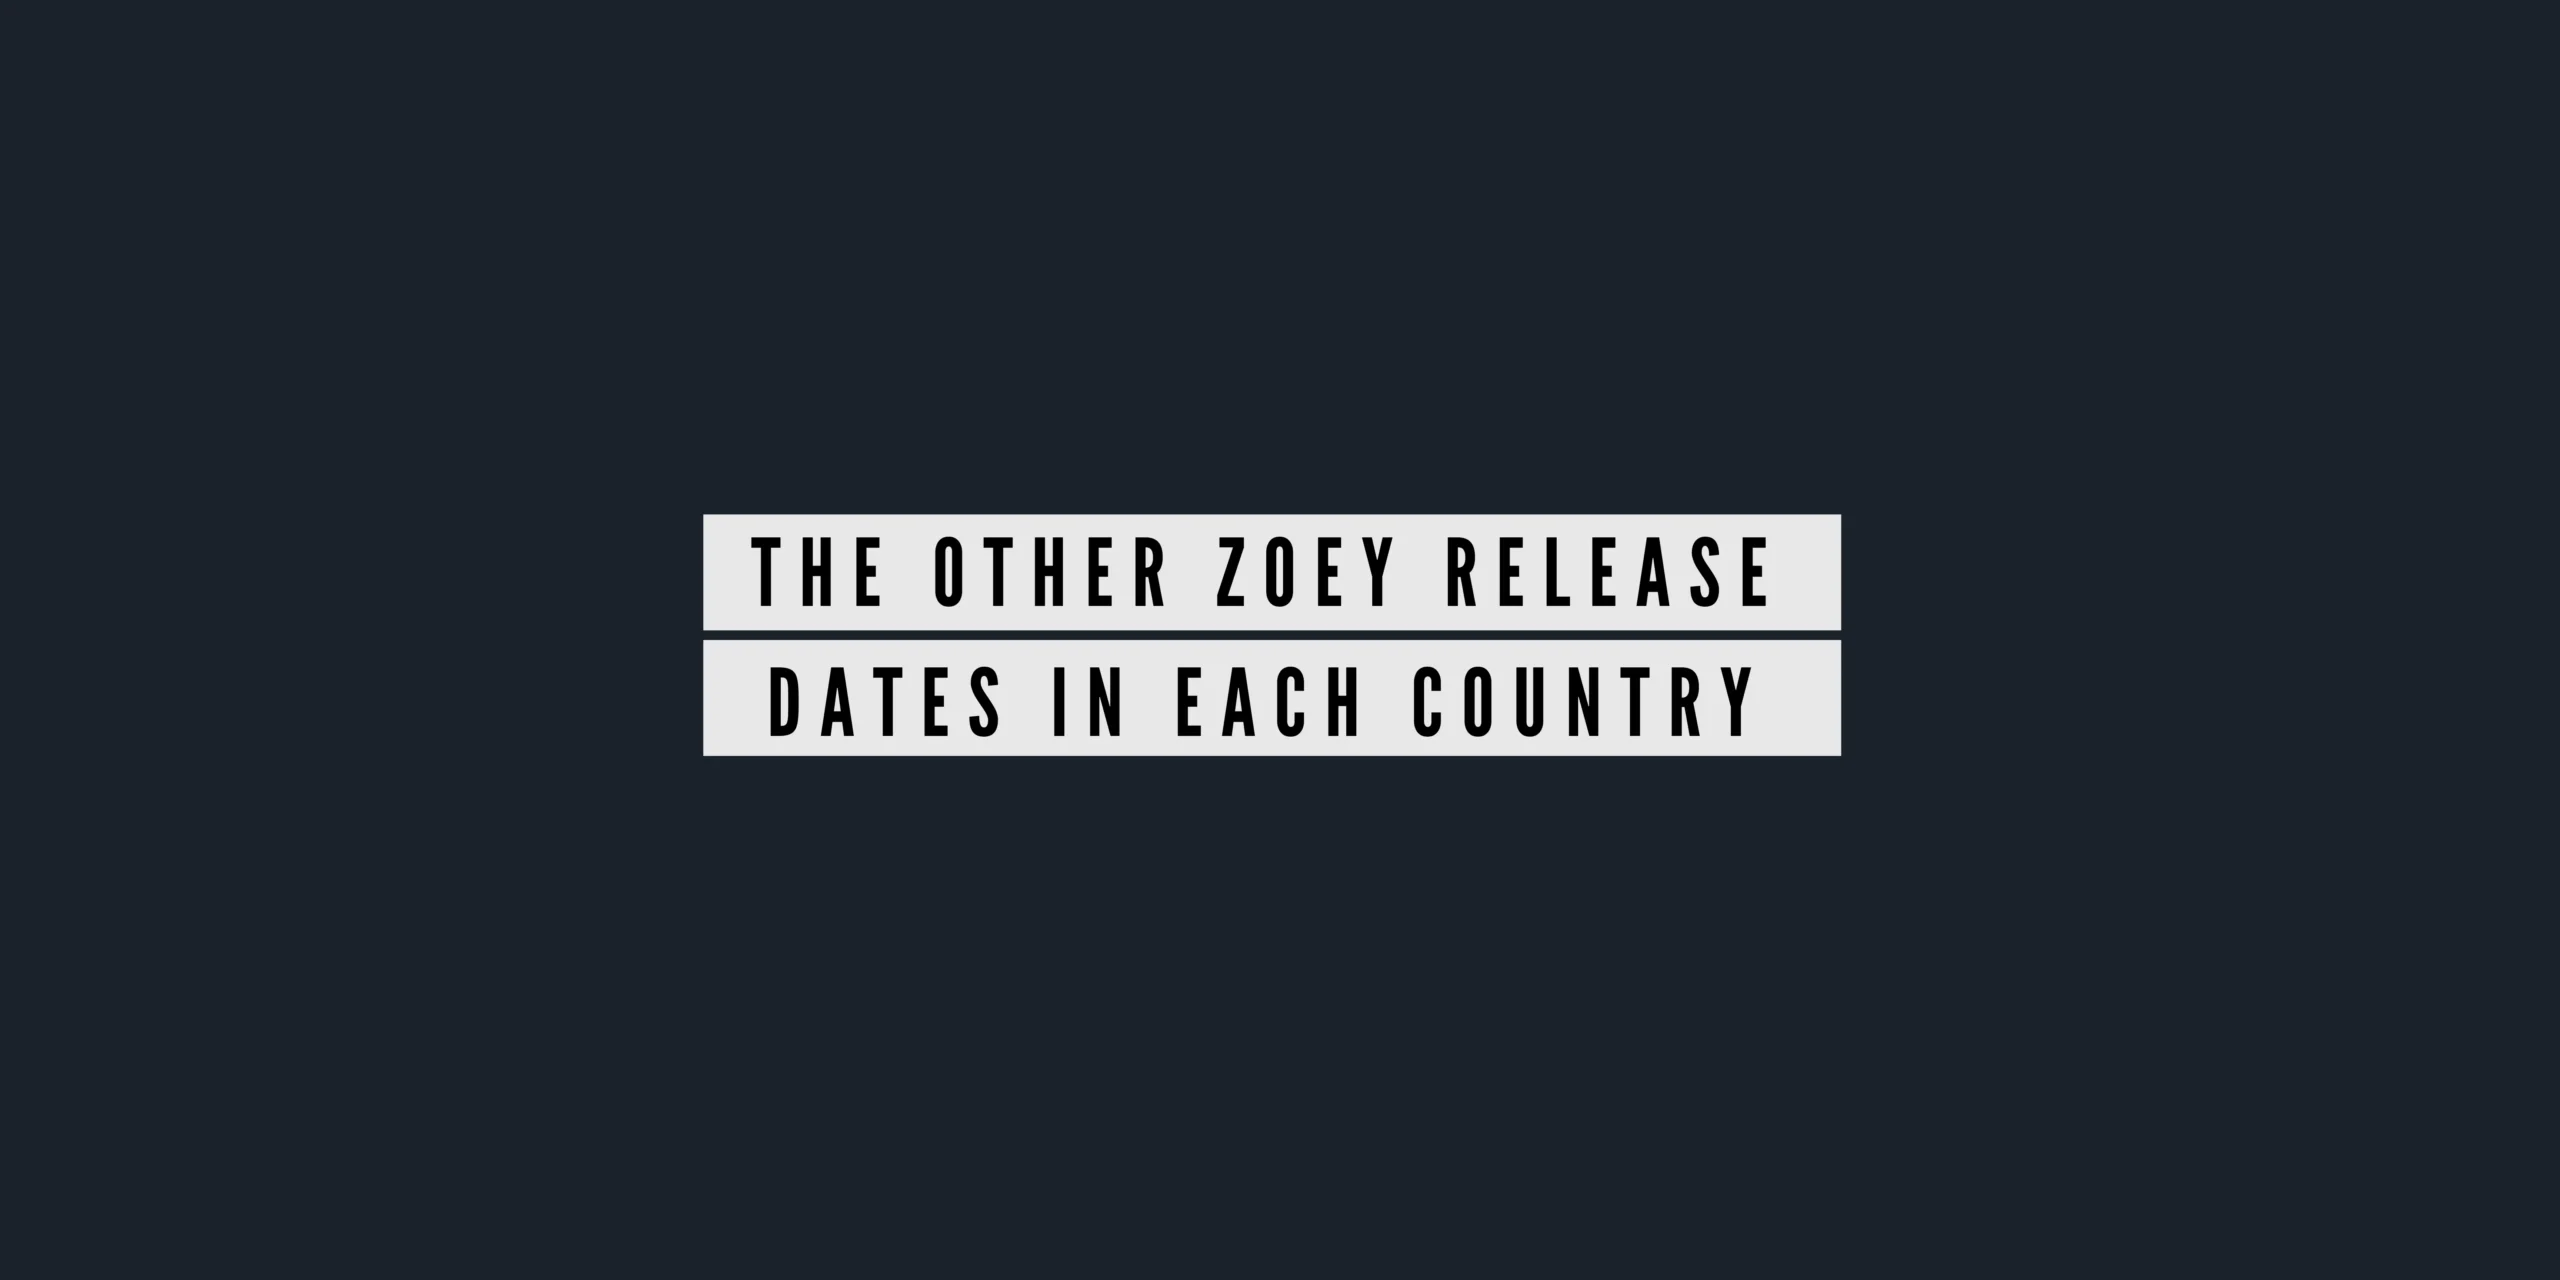 The Other Zoey release dates in each country